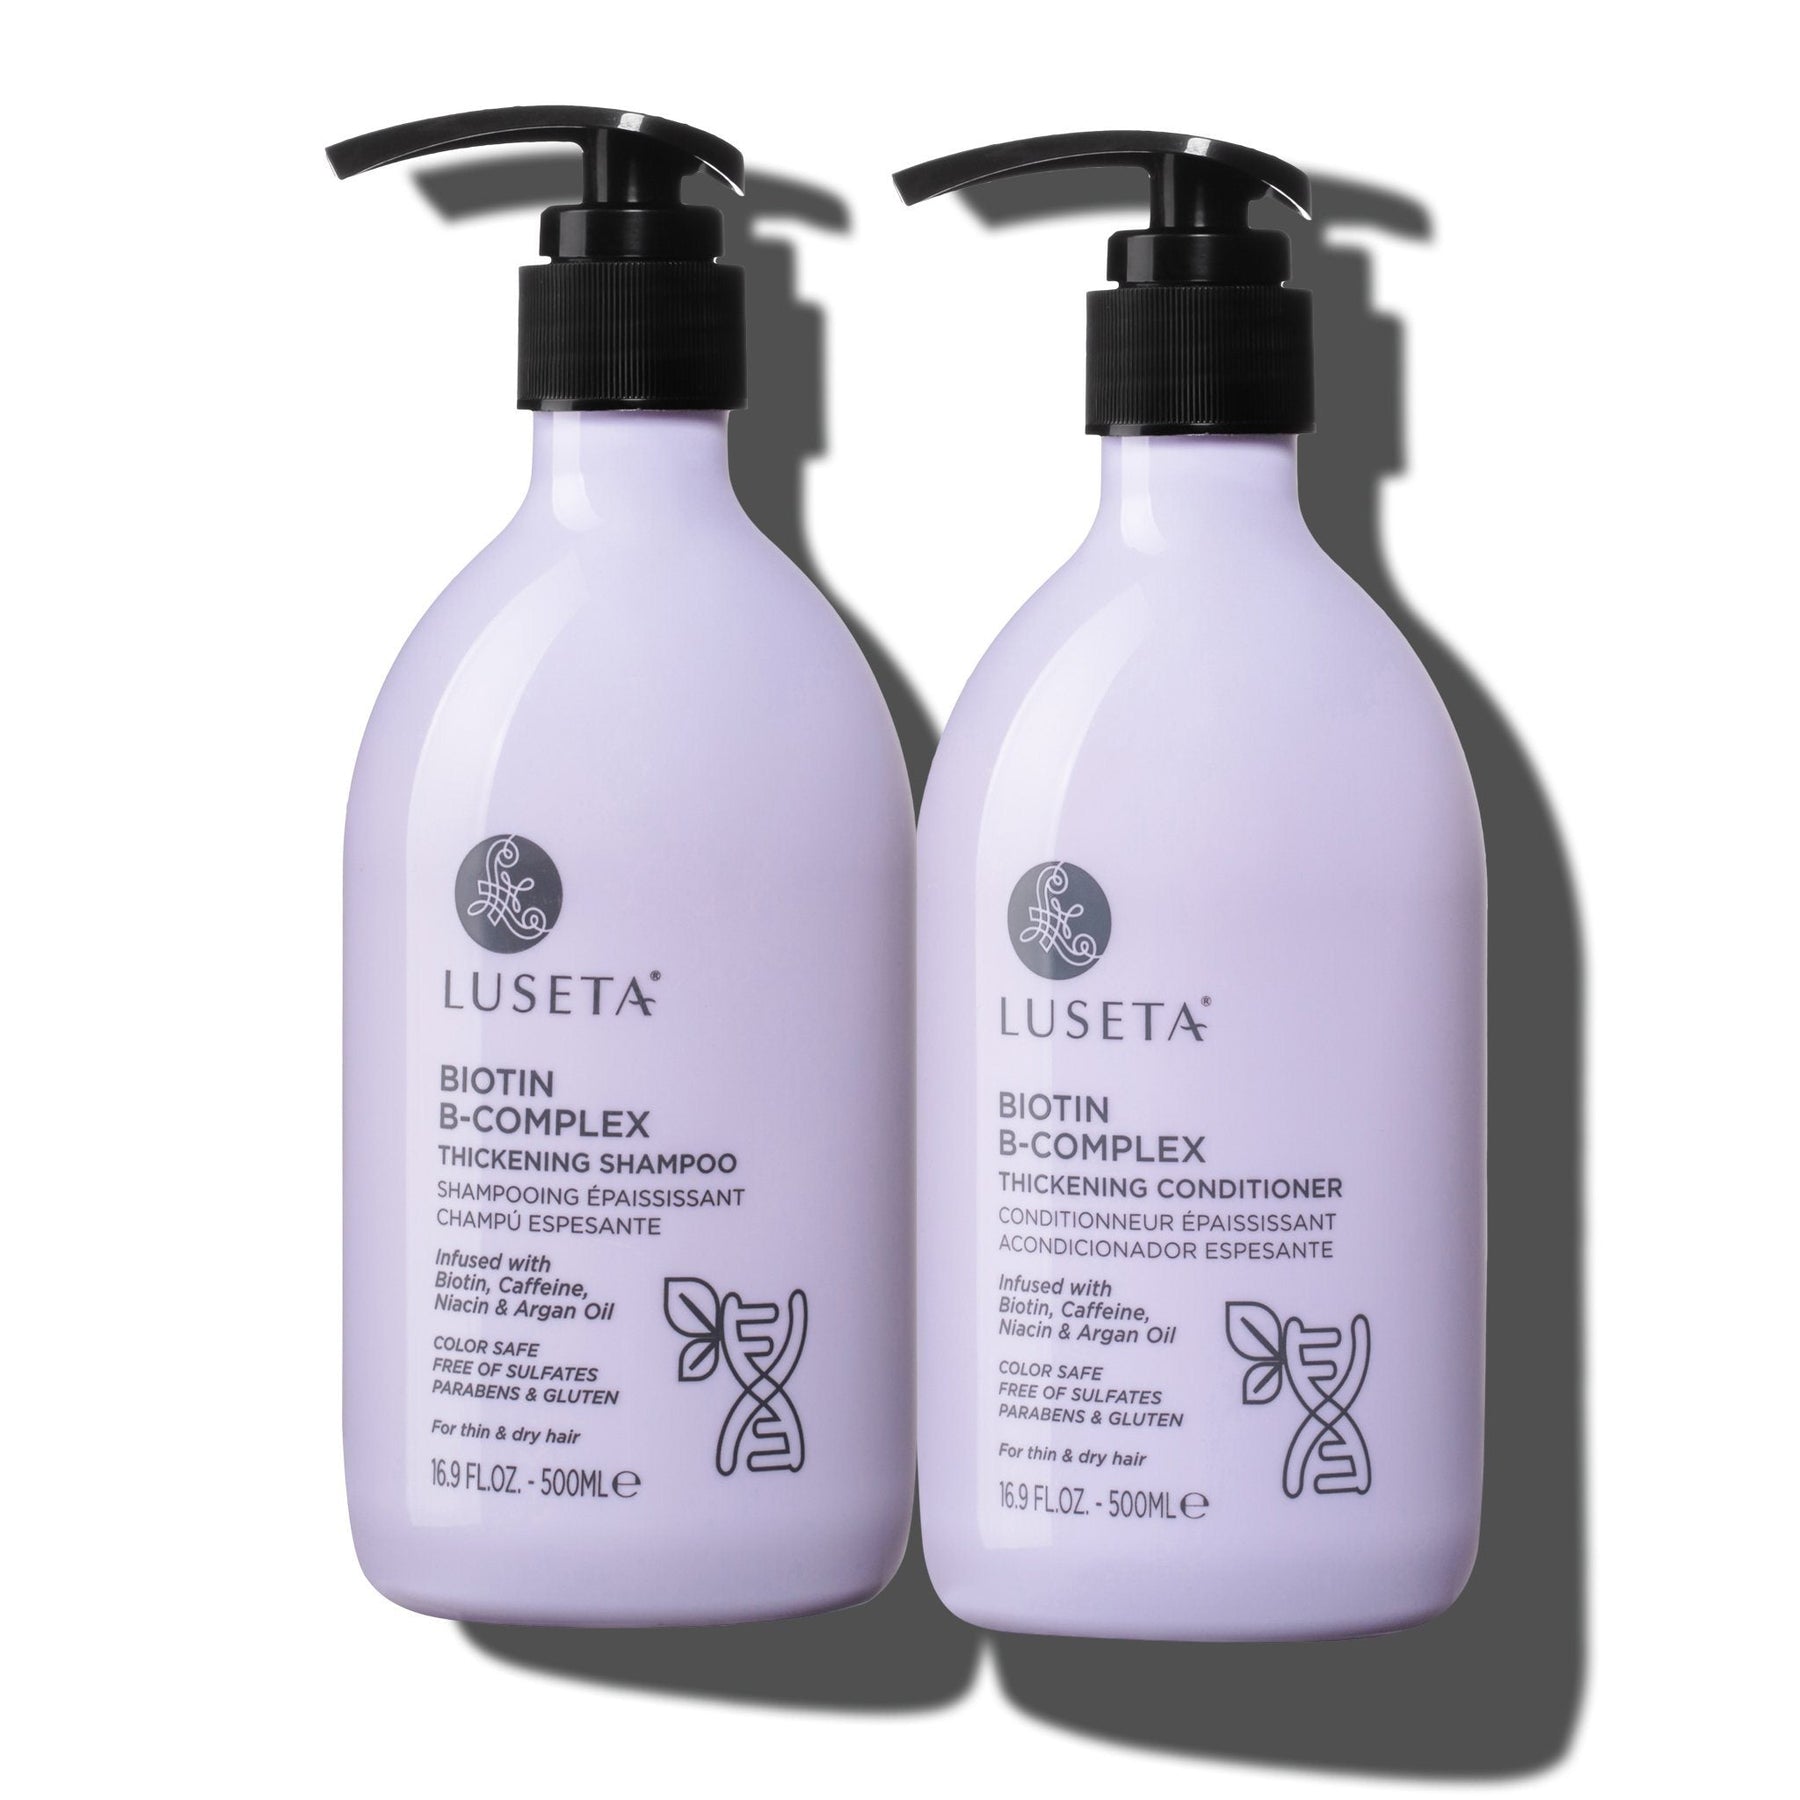 Biotin B-Complex Thickening Bundle - by Luseta Beauty |ProCare Outlet|